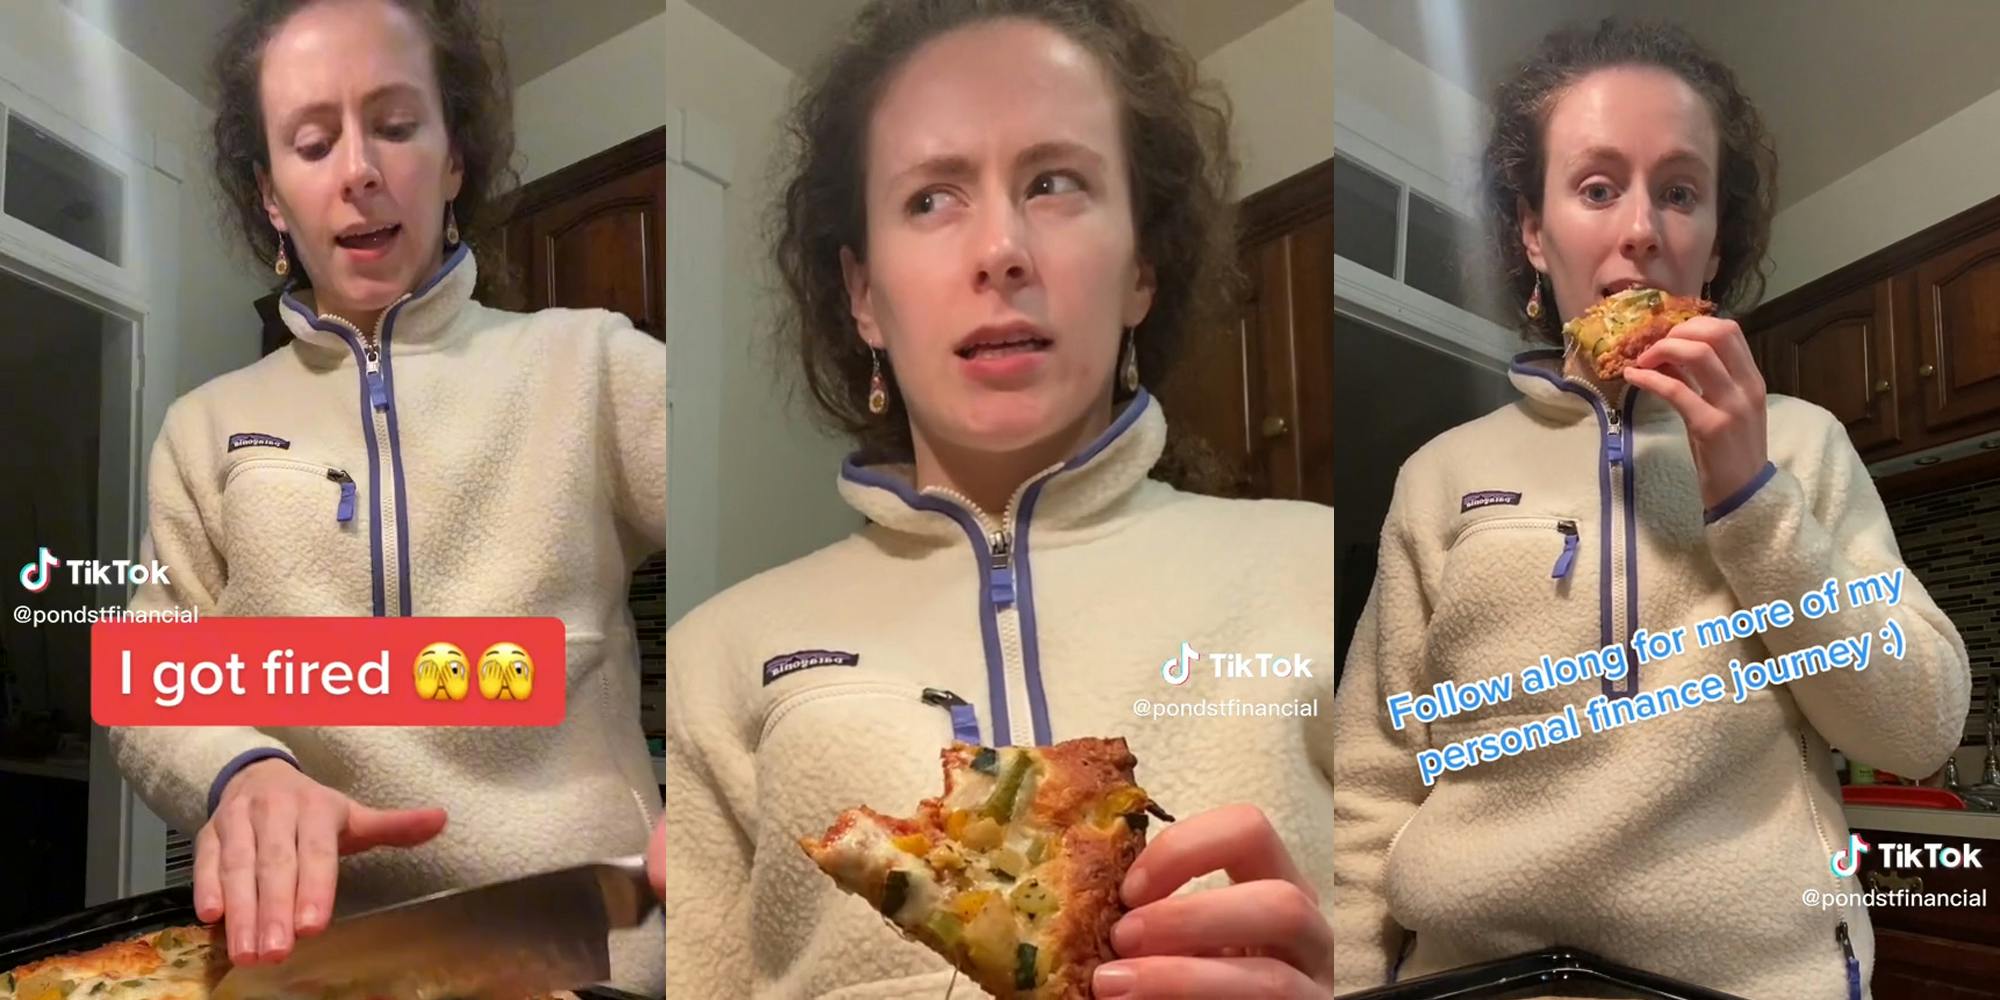 woman cutting and eating pizza in kitchen